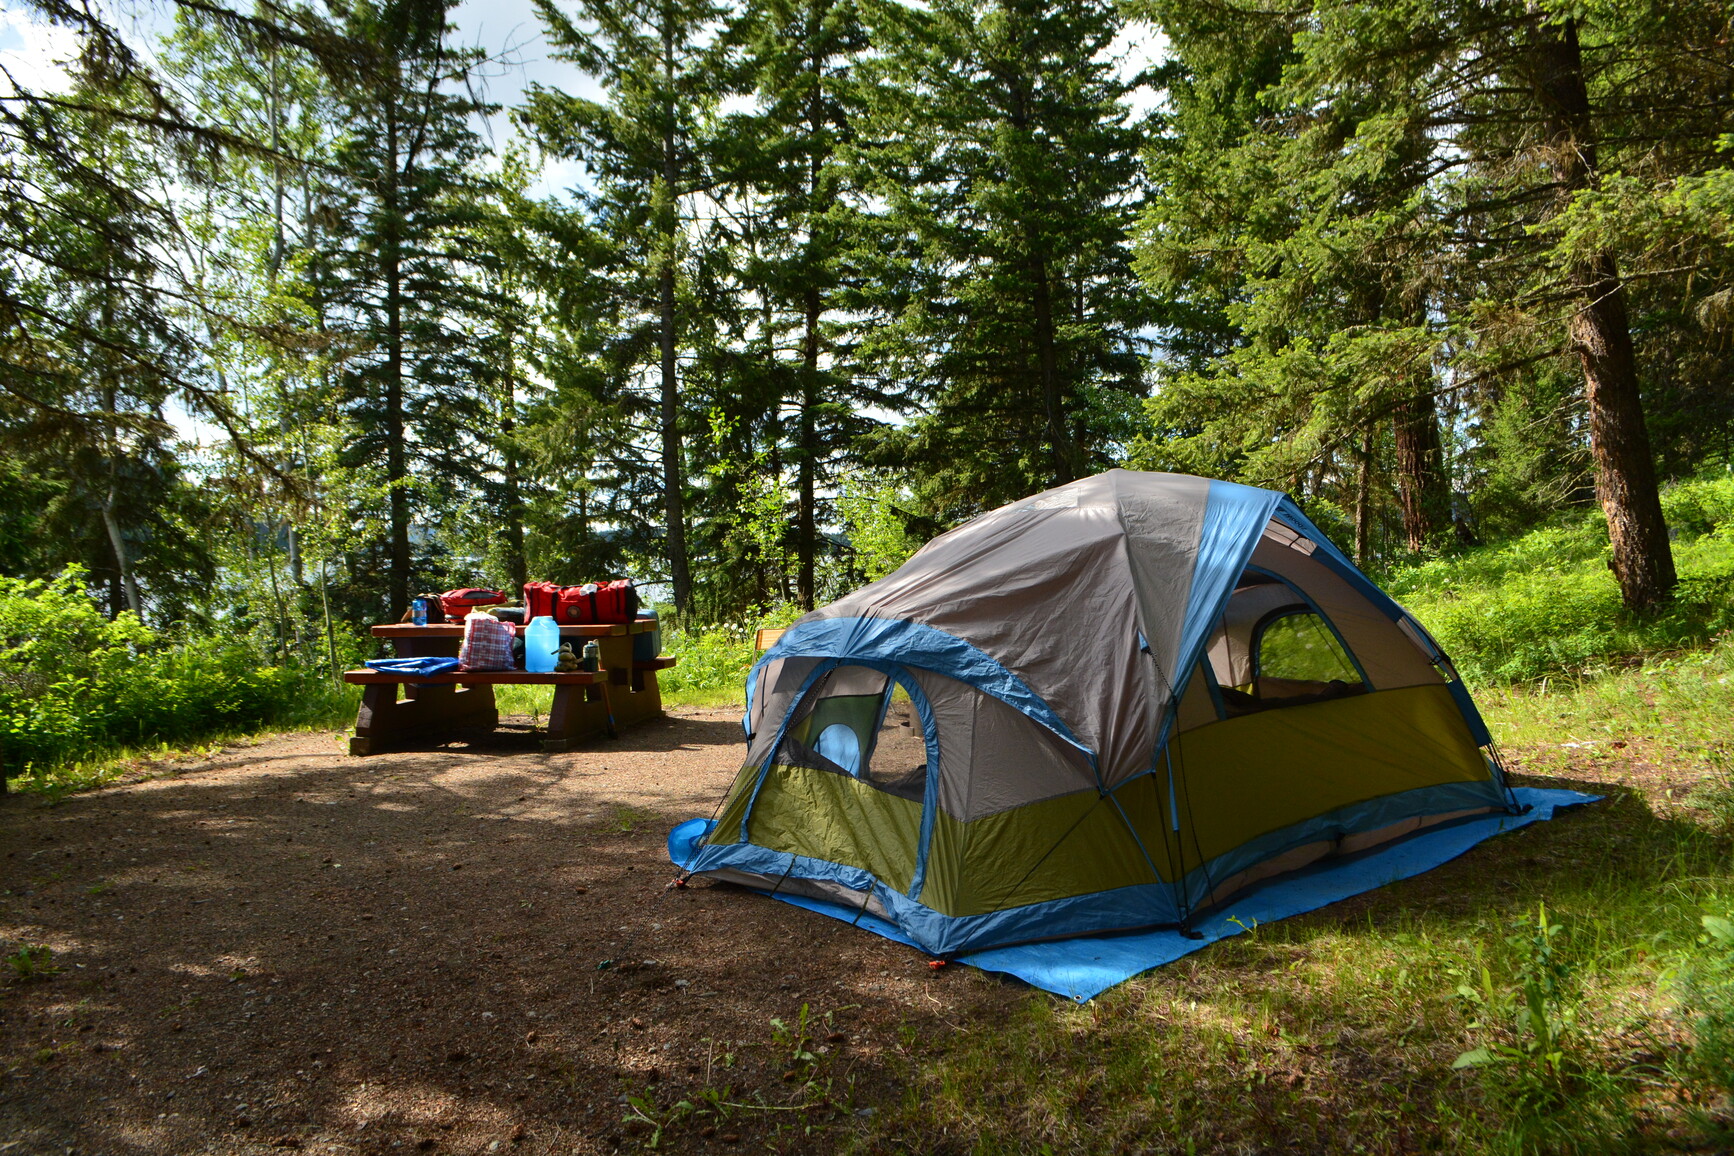 Nestled amidst trees and offering a scenic lake vista, Bridge Lake Park features spacious campsites.